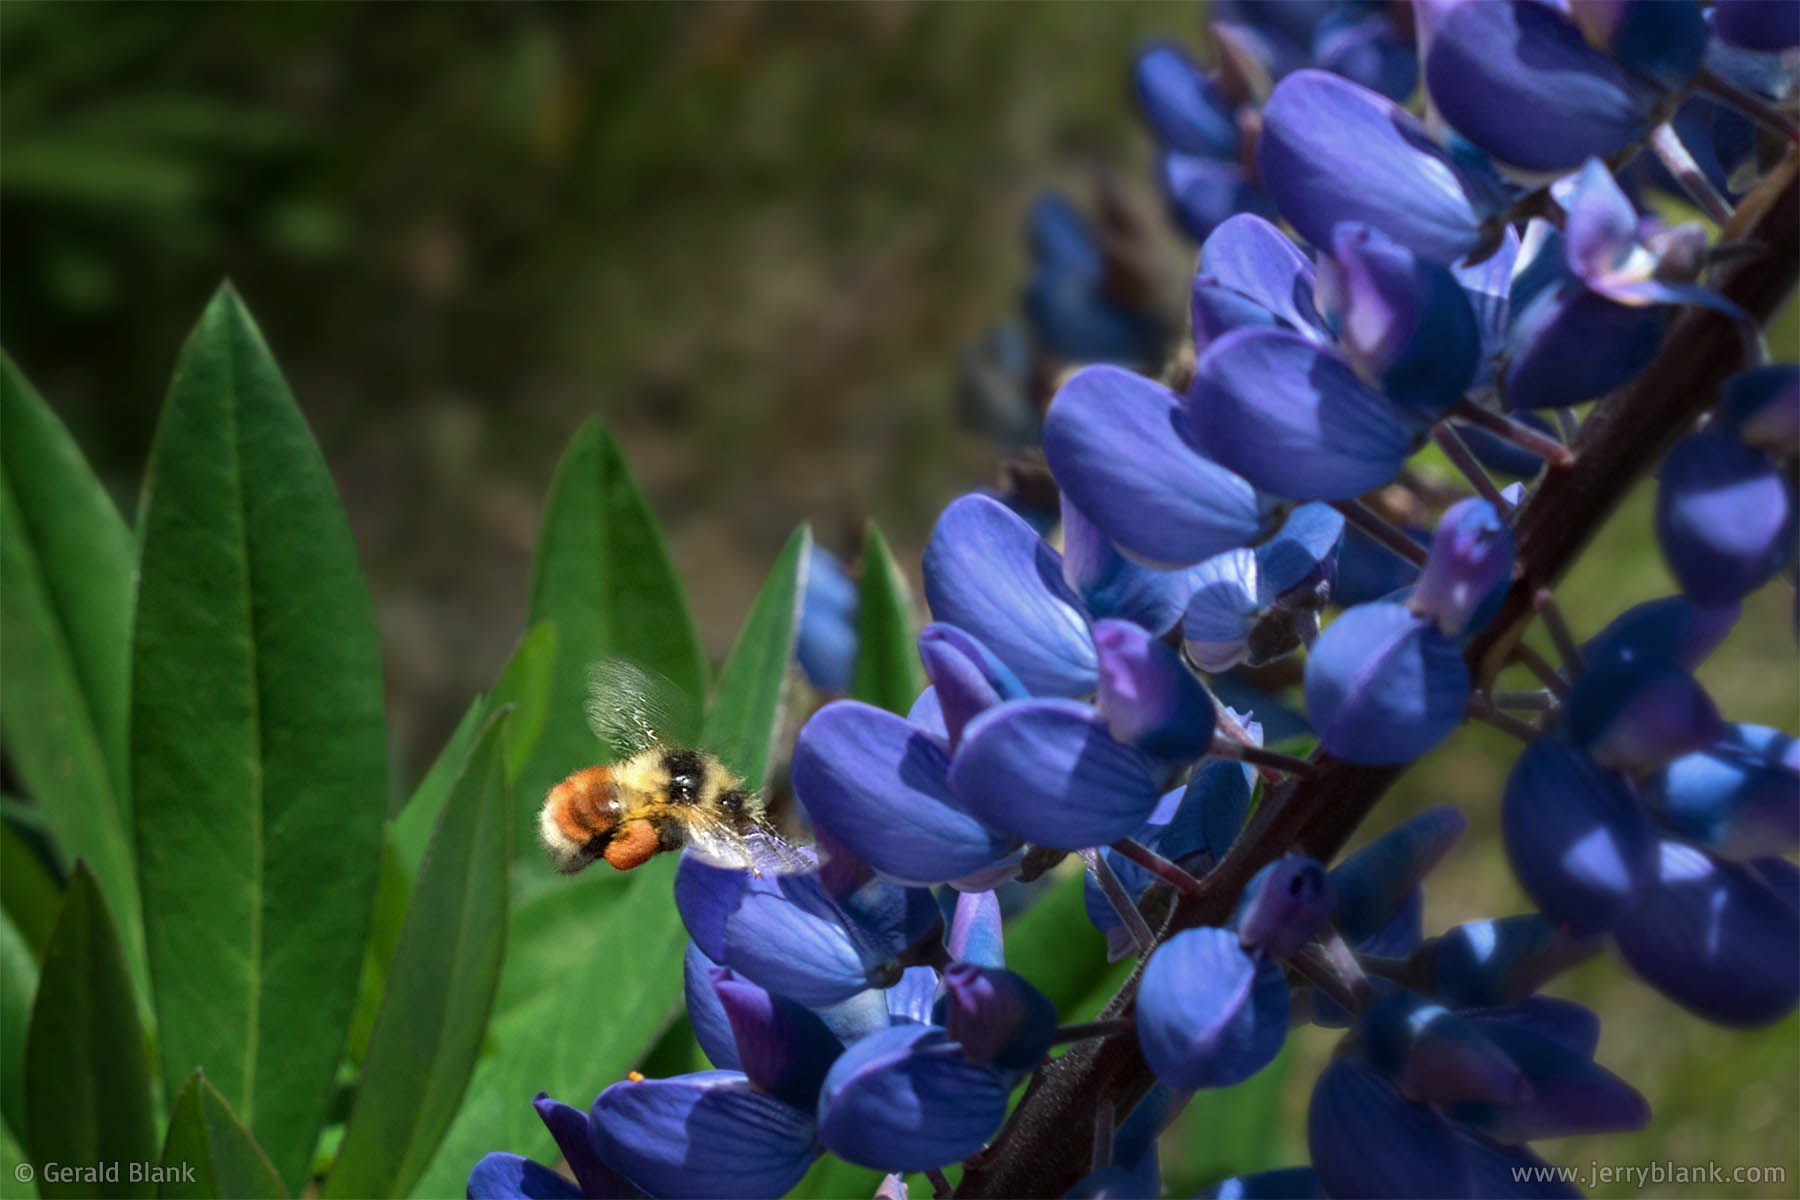 #63000 - A bee gathers nectar from lupines blooming near Berthoud Pass, Colorado - photo by Jerry Blank